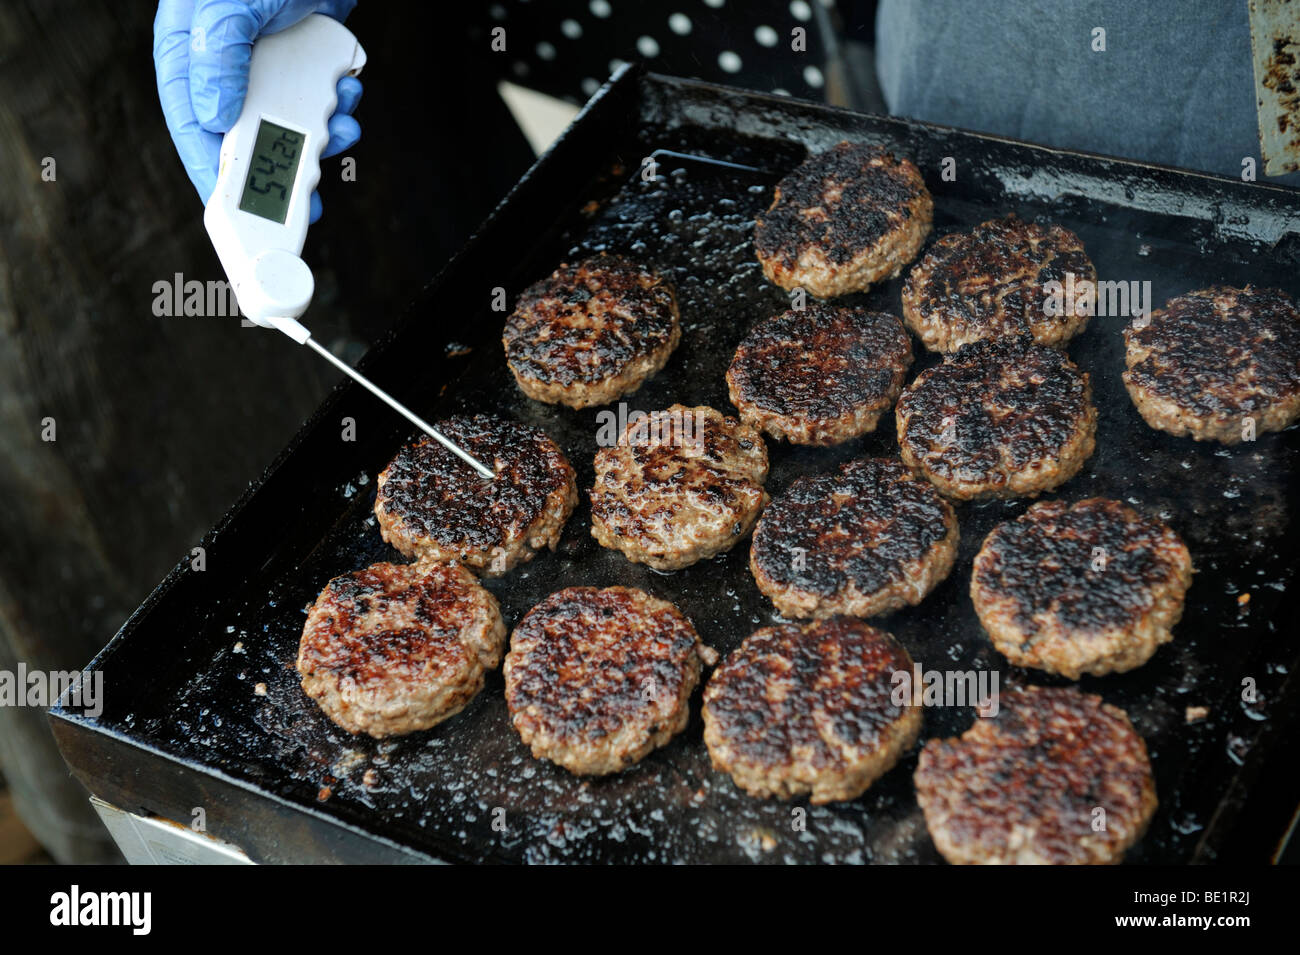 Hamburgers being cooked on hotplate and digital thermometer checking internal temperature Stock Photo